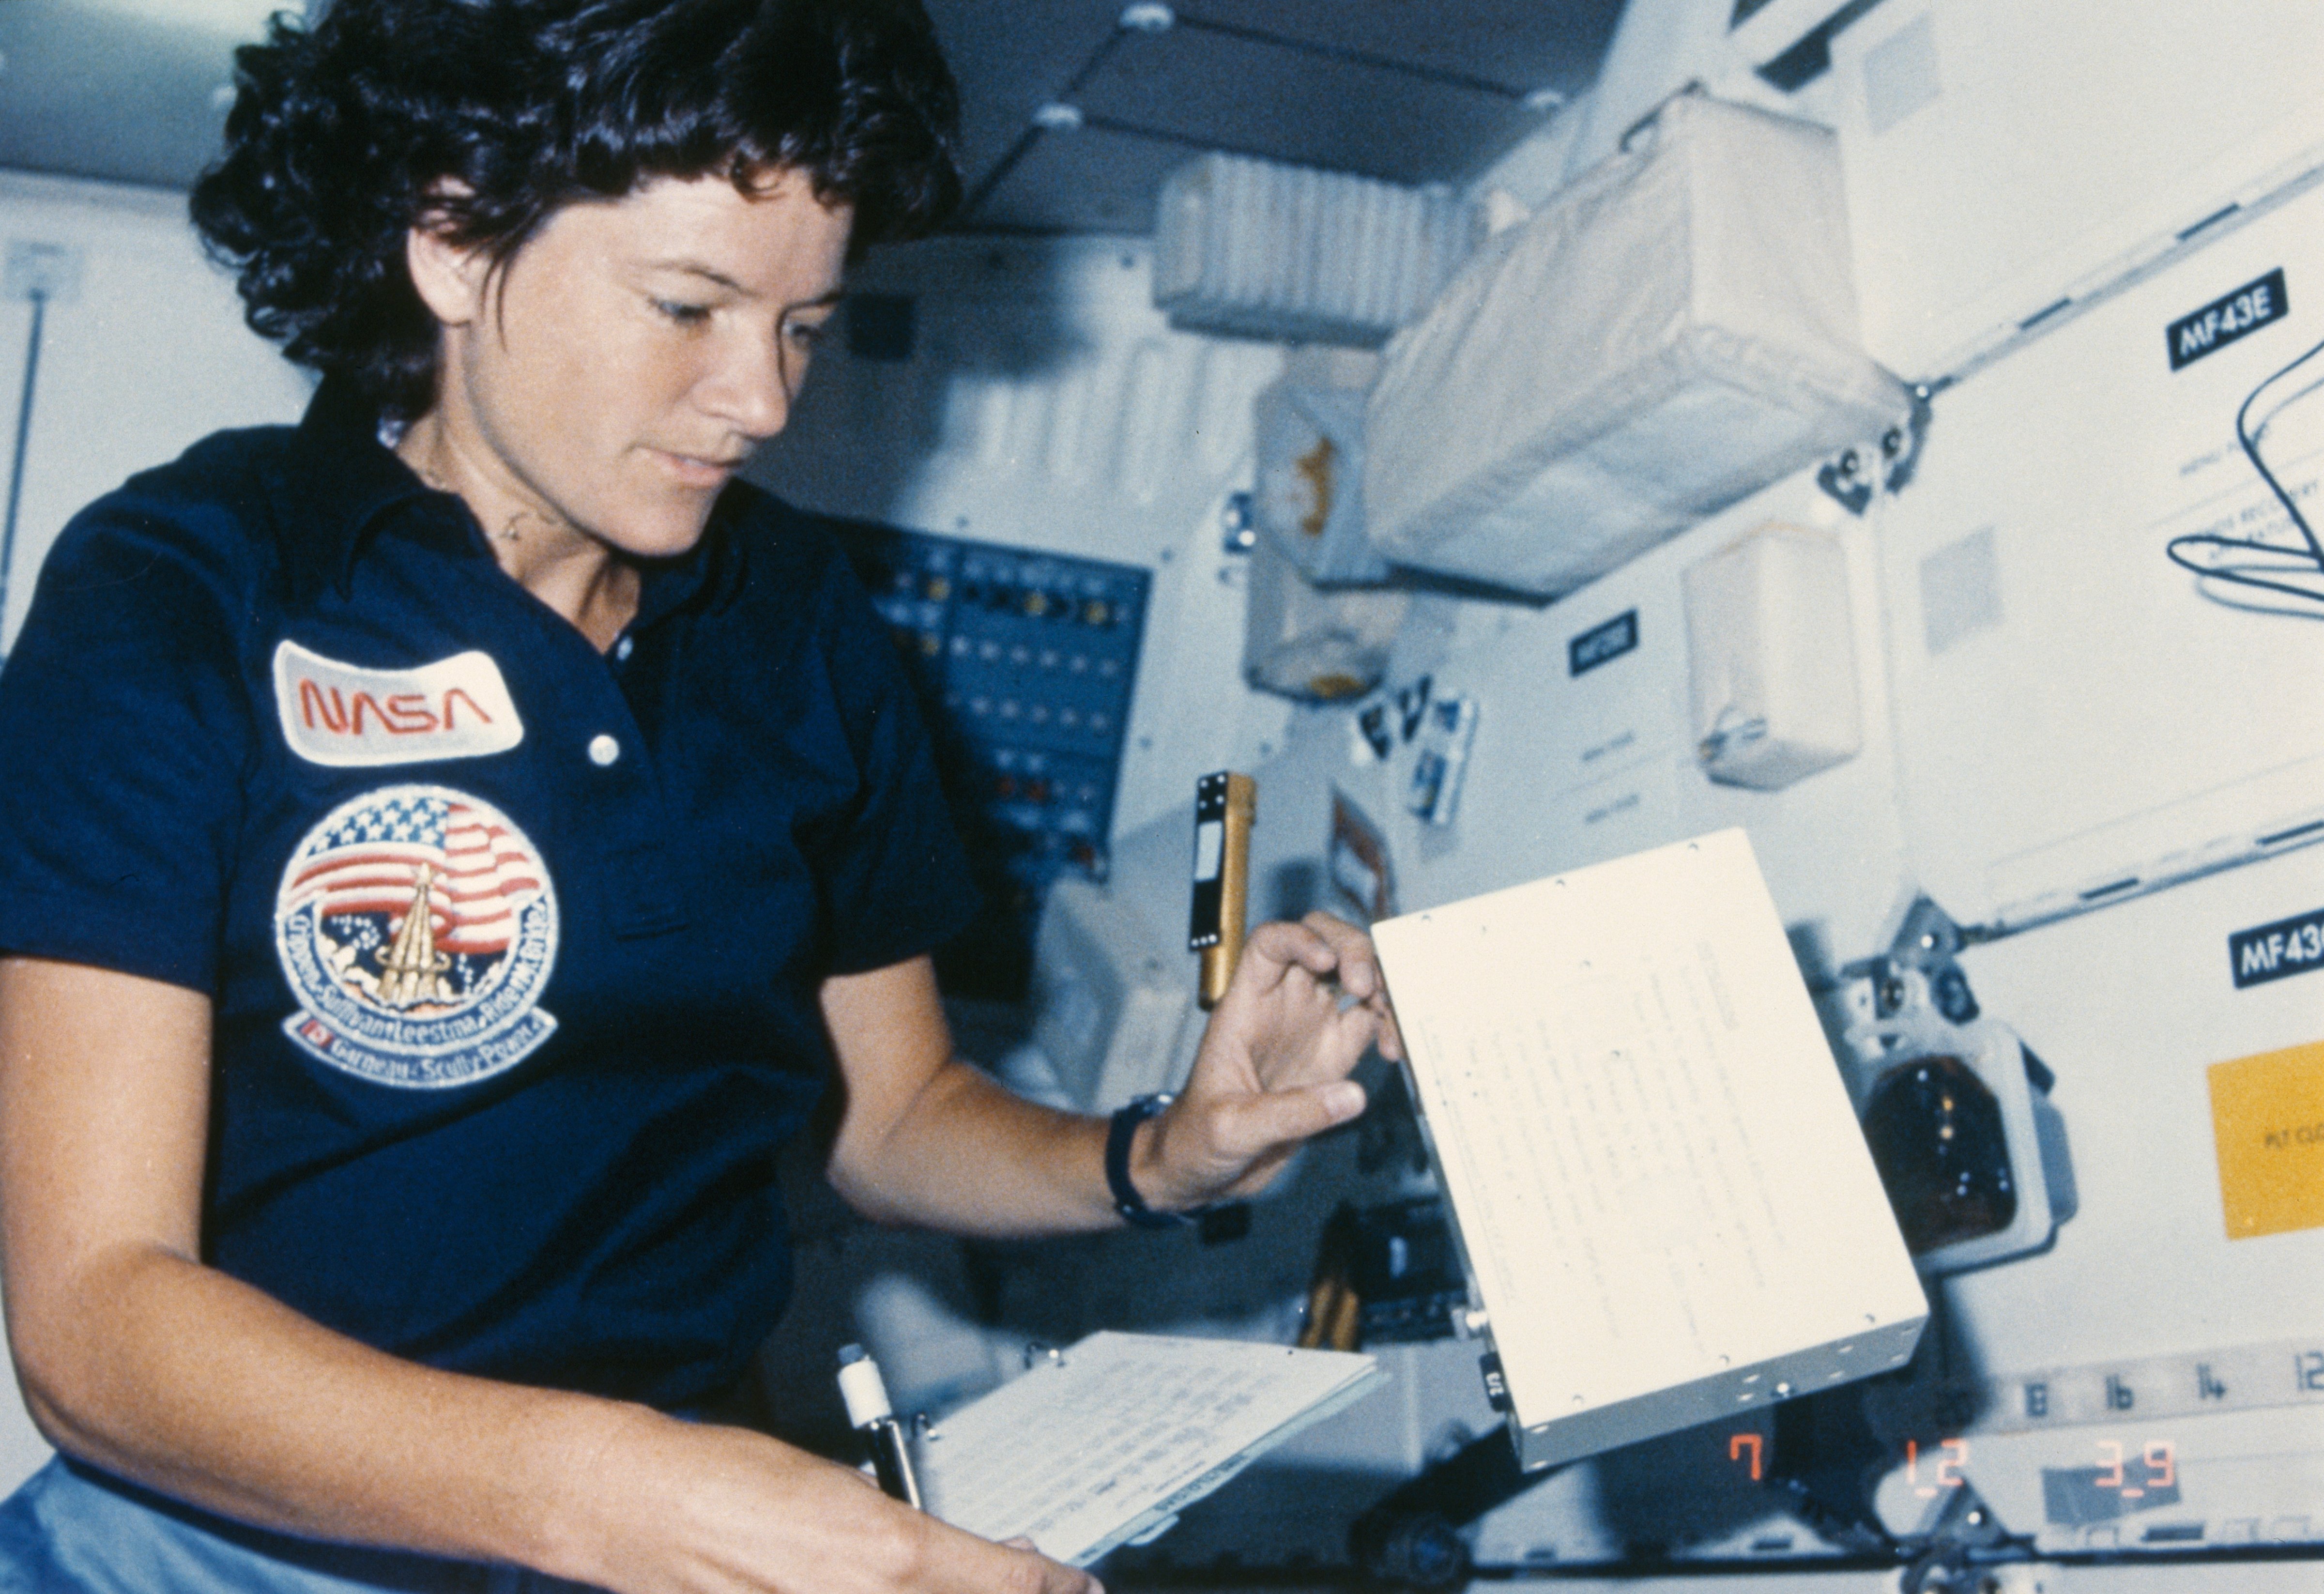 NASA astronaut Sally Ride (1951 - 2012) in the interior of the Challenger space shuttle during the STS-41-G mission, October 1984. In 1983 she became the first American woman in space on the STS-7 mission. (Photo by Space Frontiers/Getty Images) (Space Frontiers—Getty Images)